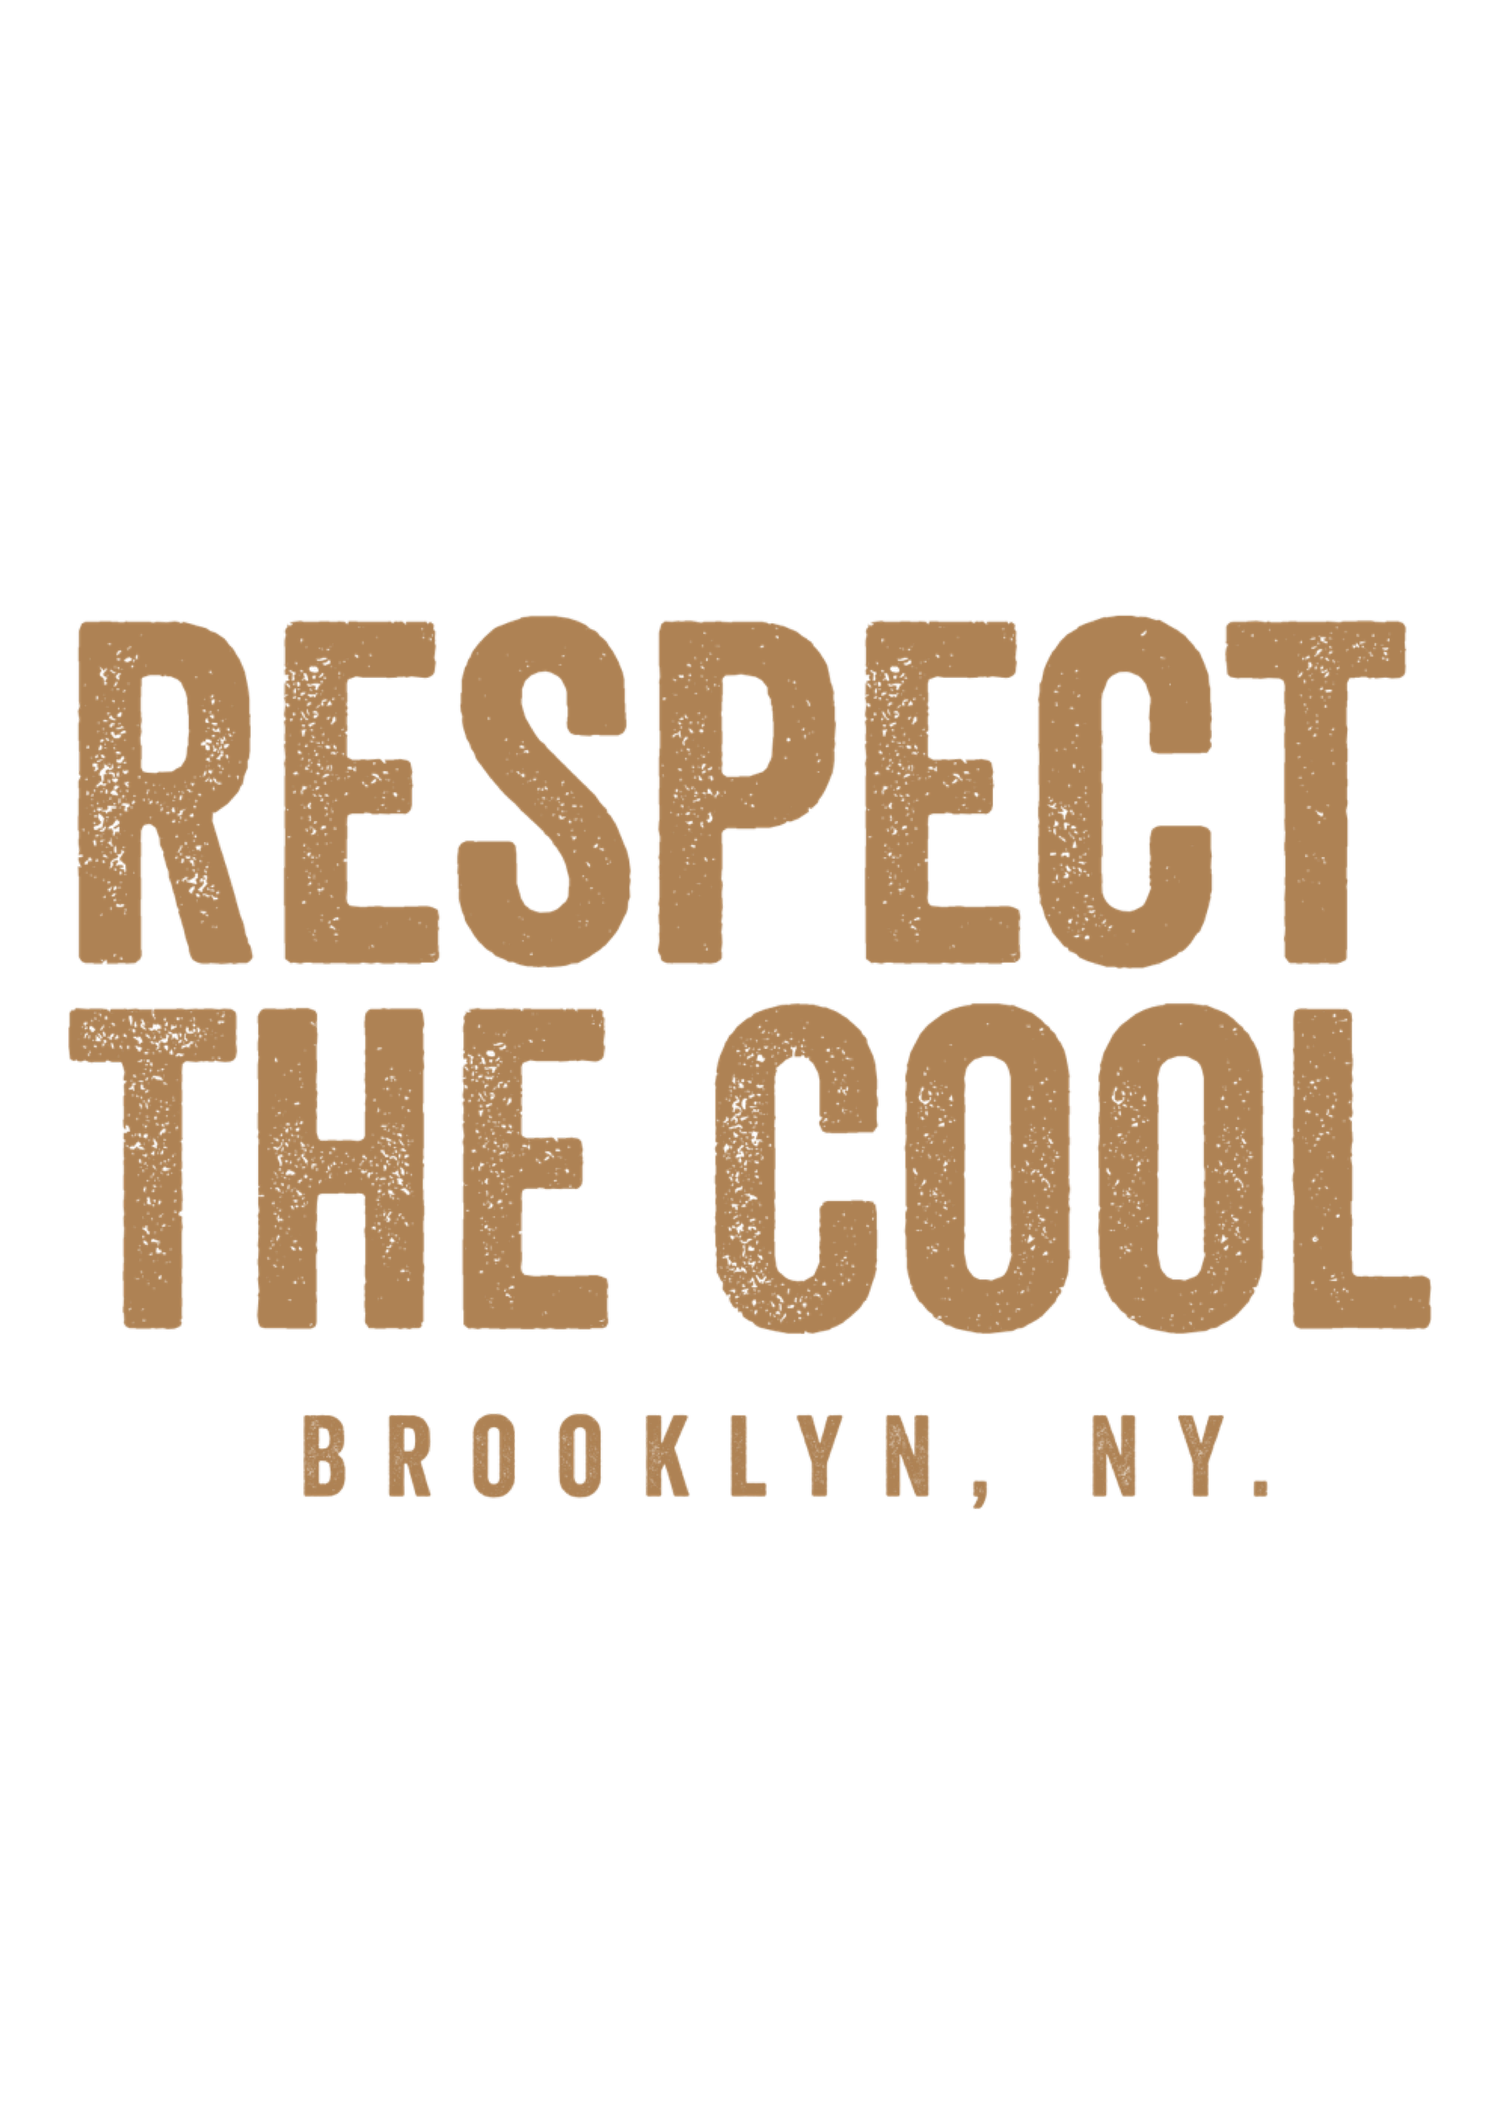 Respect The Cool